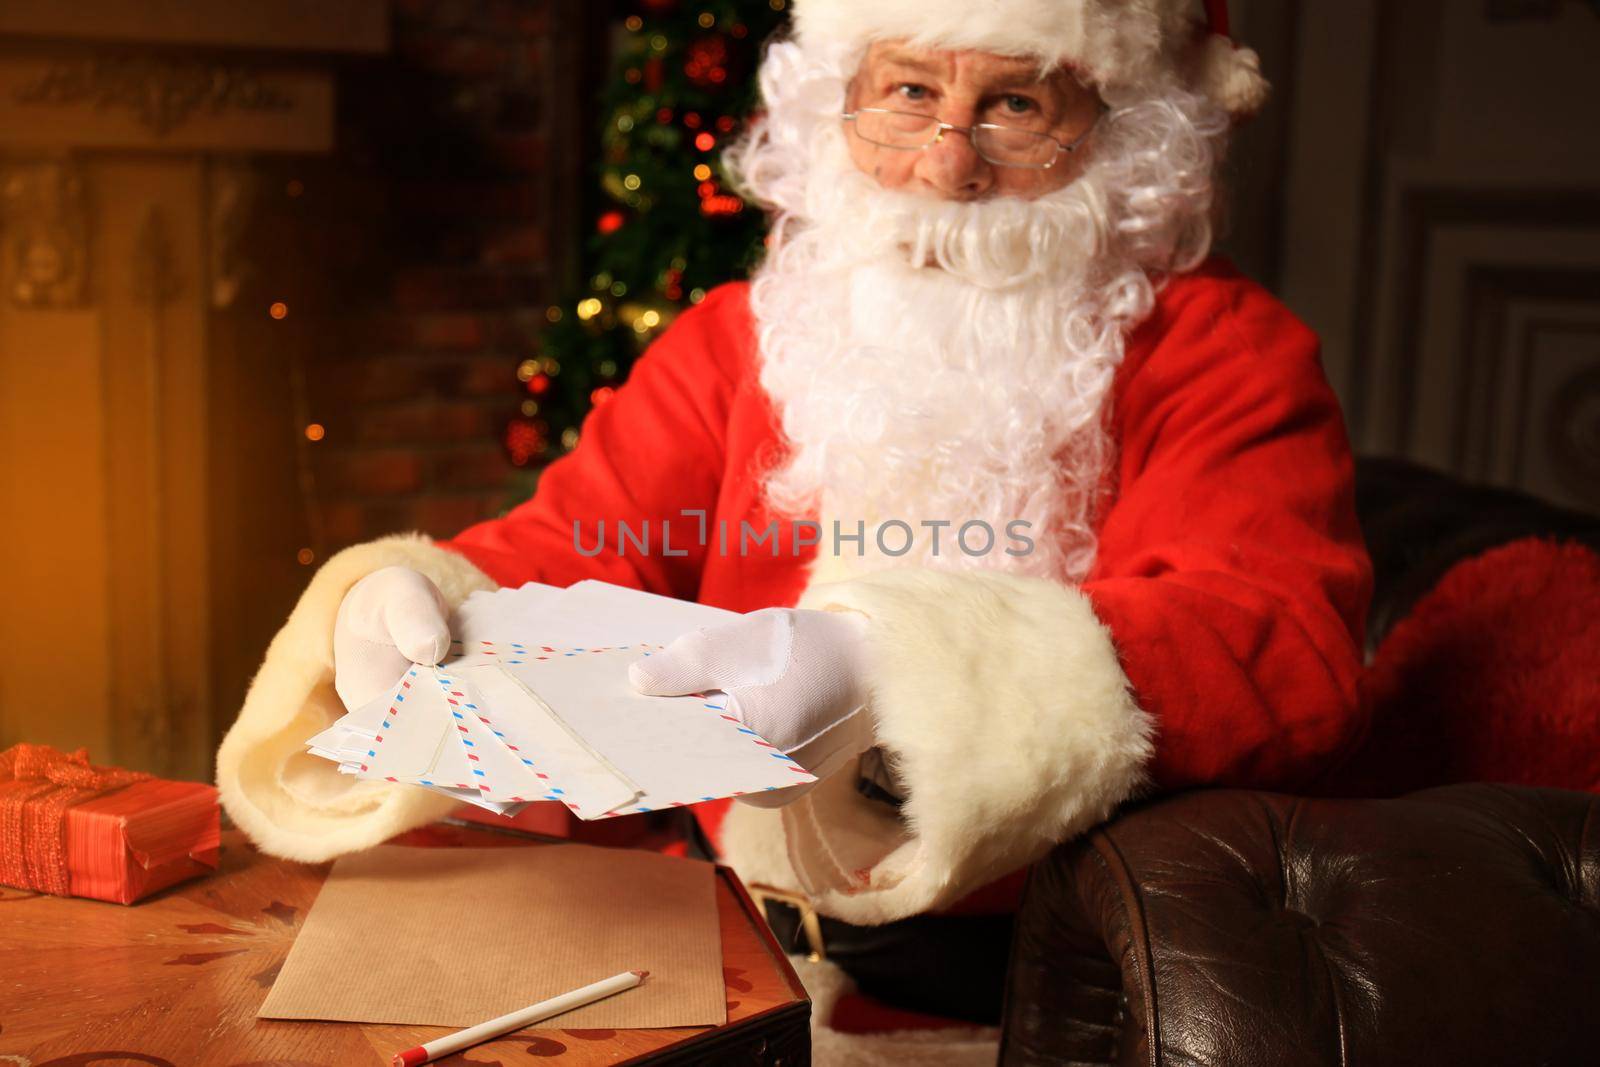 Santa sitting at the Christmas tree, holding Christmas letters and having a rest by the fireplace.